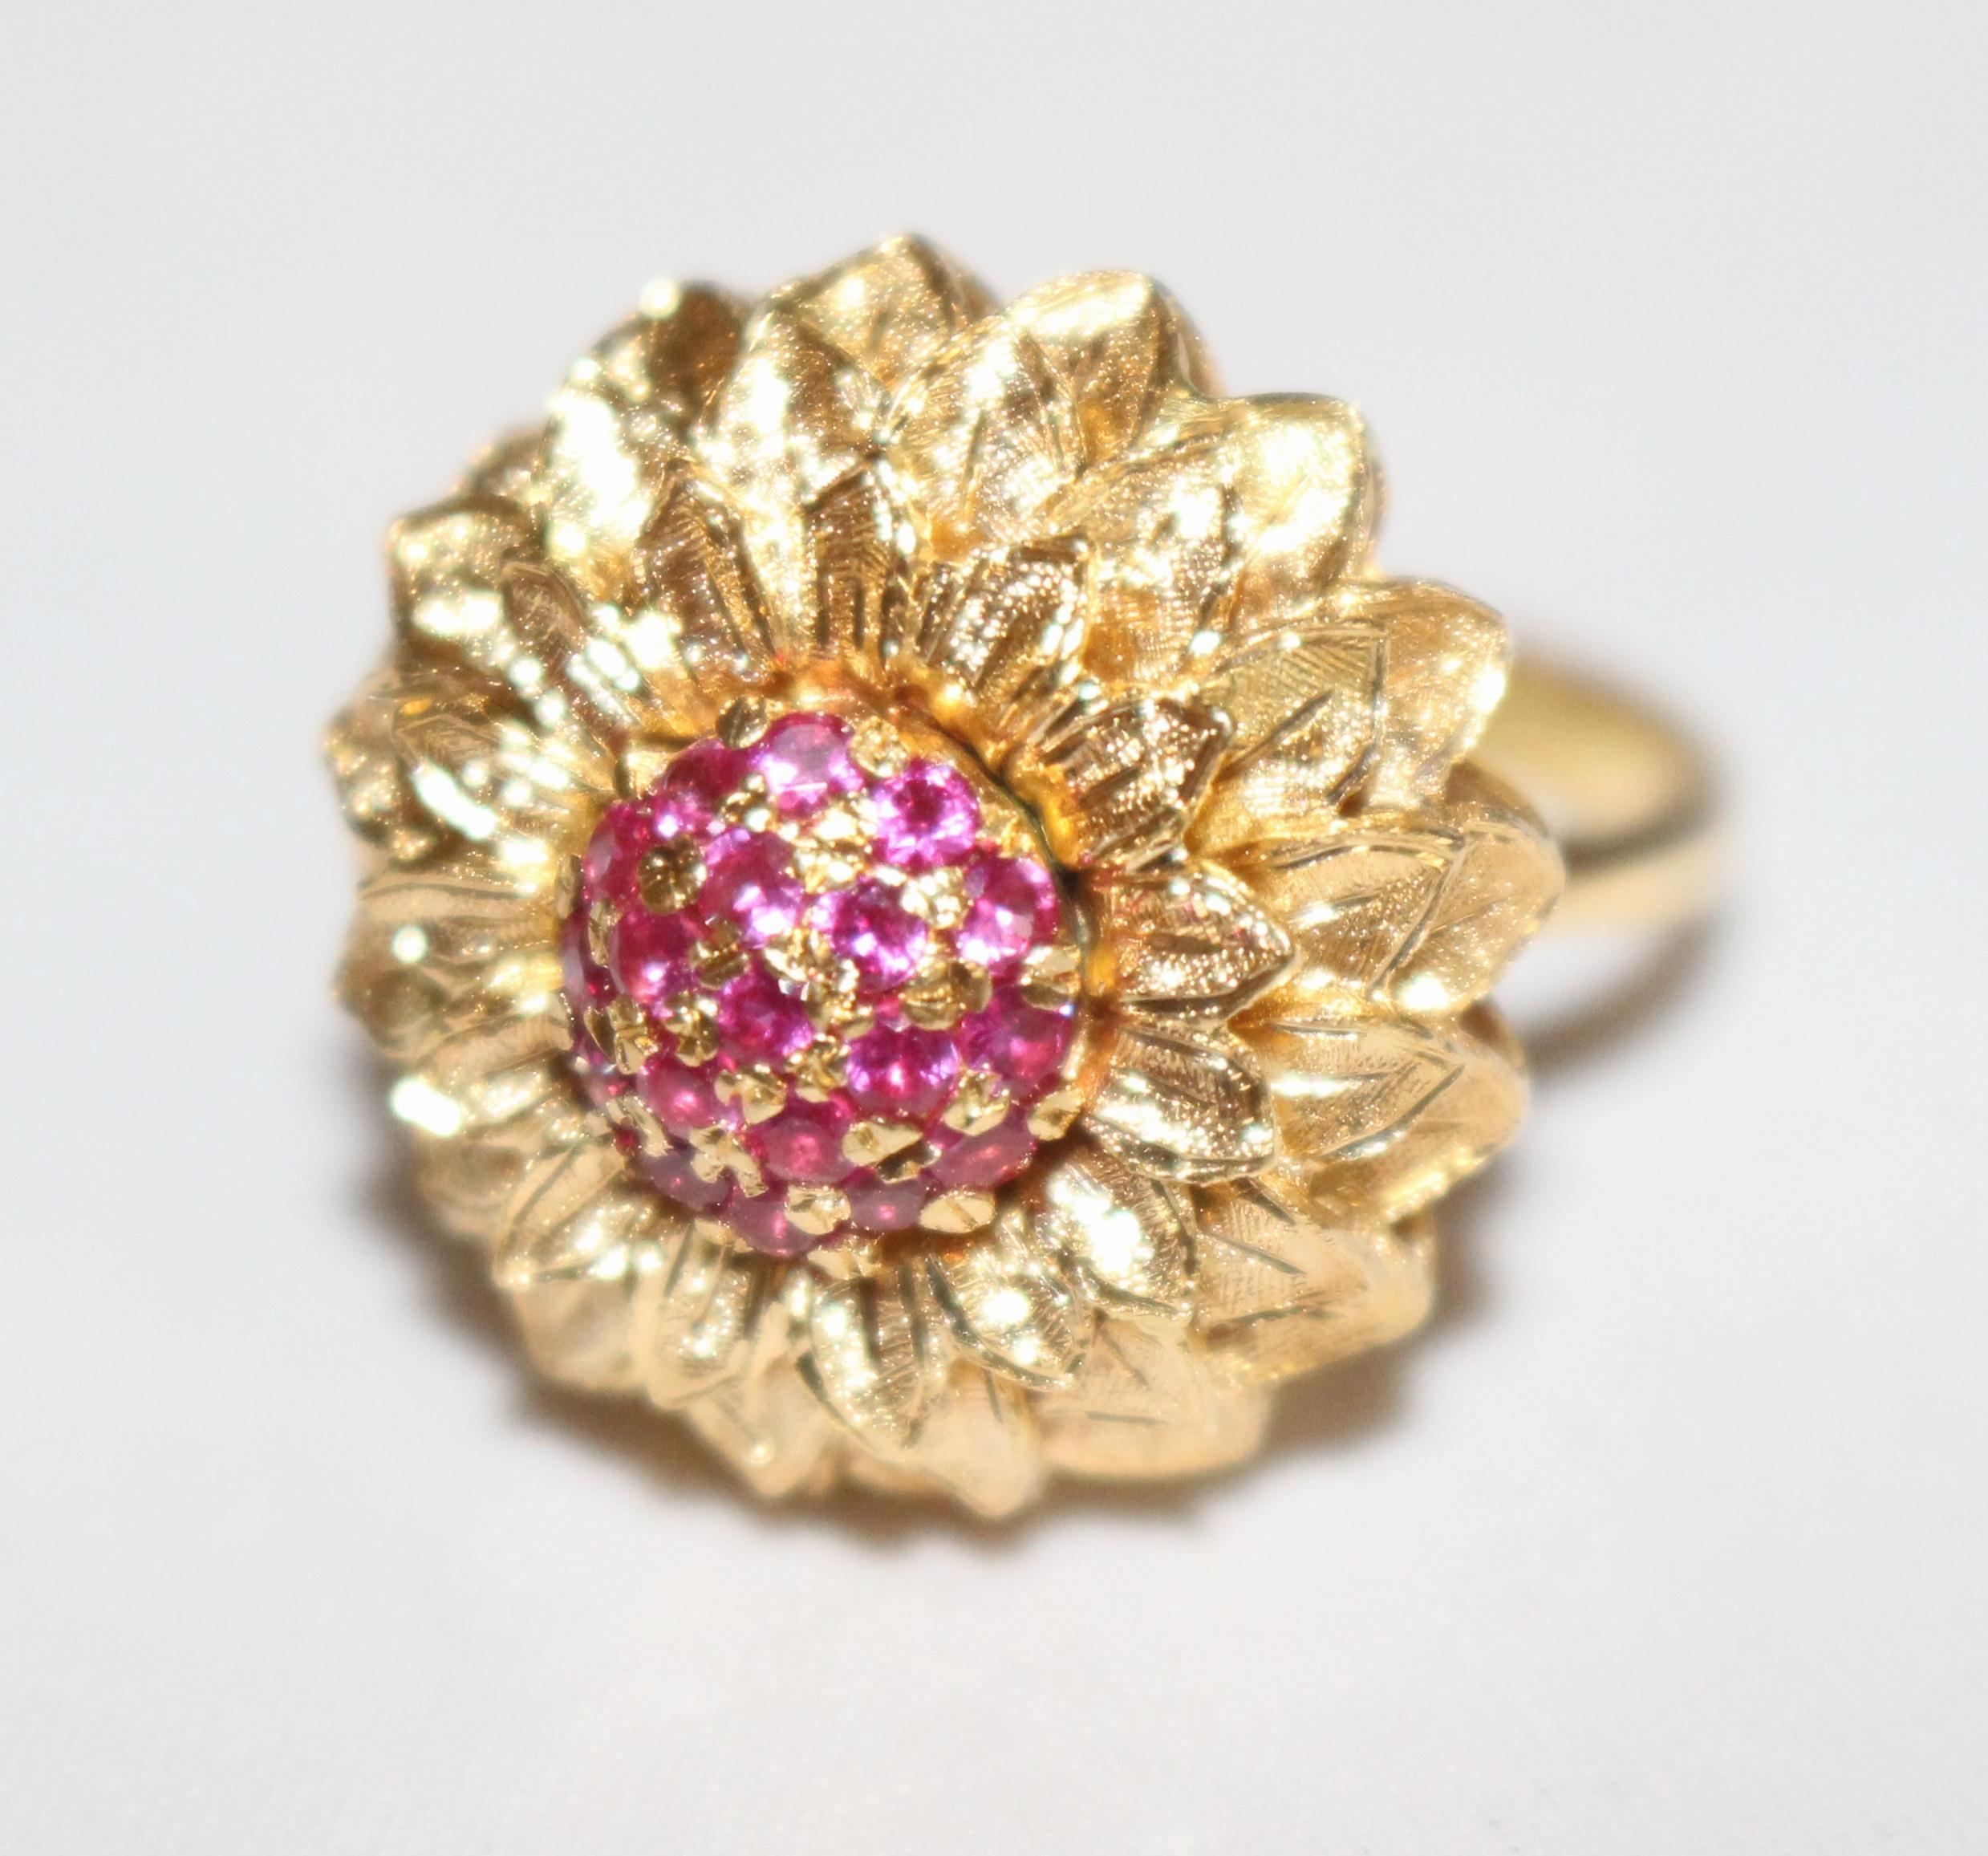 Stones 19 dark pink rubies, total ruby weight 0.40 carat
Gold 18-carat yellow gold, marked 750
Ring size J 1/2 (British), 5.25 (USA)
Gross item weight 10.6 g
Condition: Very good condition. 




Very stylish sunflower design pink ruby